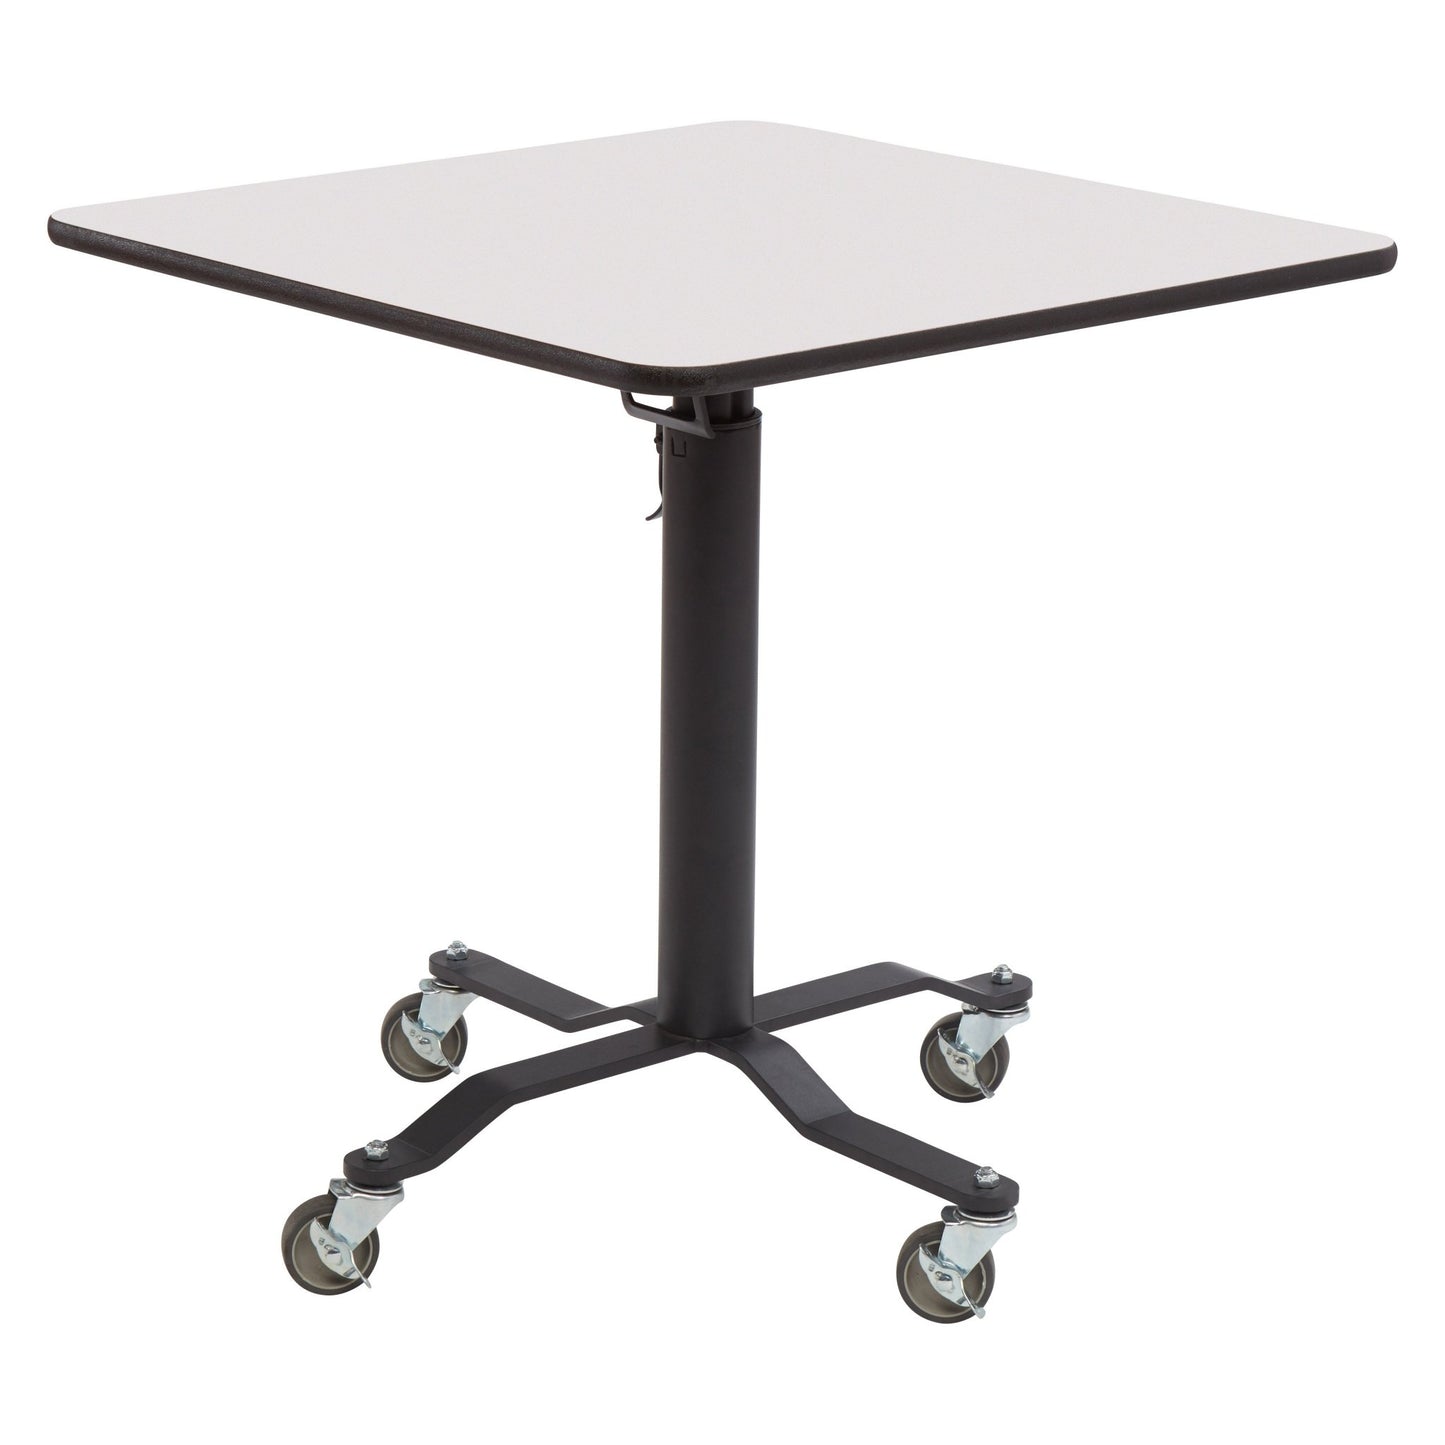 NPS Cafe Time II Table, 24" Square, Whiteboard Top, MDF Core, Protect Edge (NationalPublic Seating NPS-PCT324MDPEWB) - SchoolOutlet